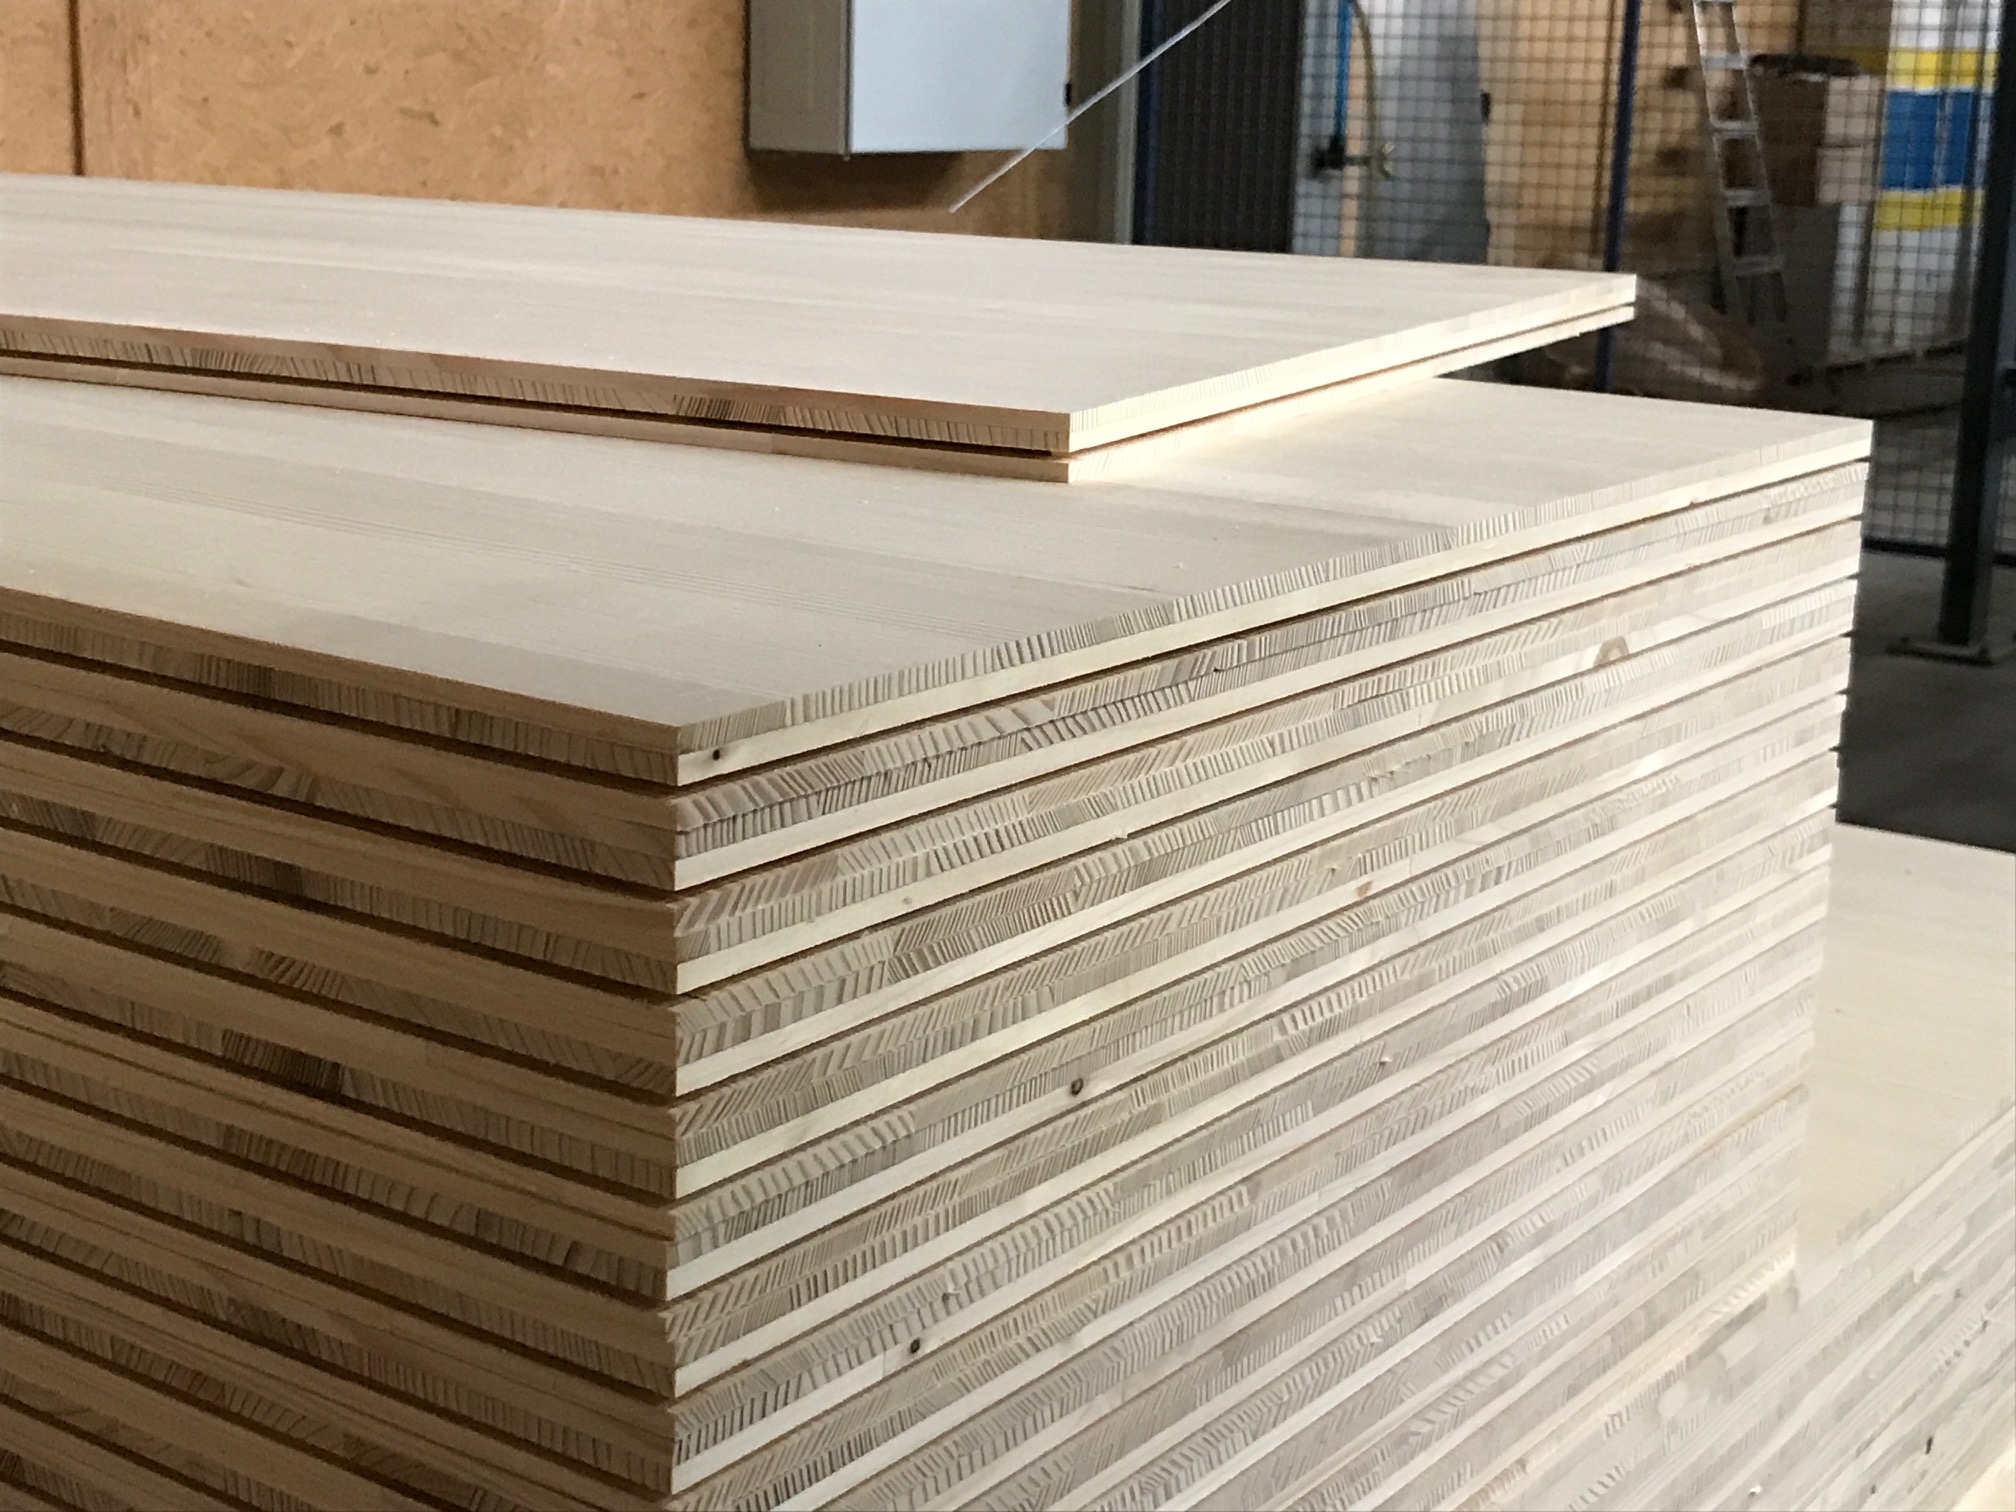 The next stage in the field of wood panels